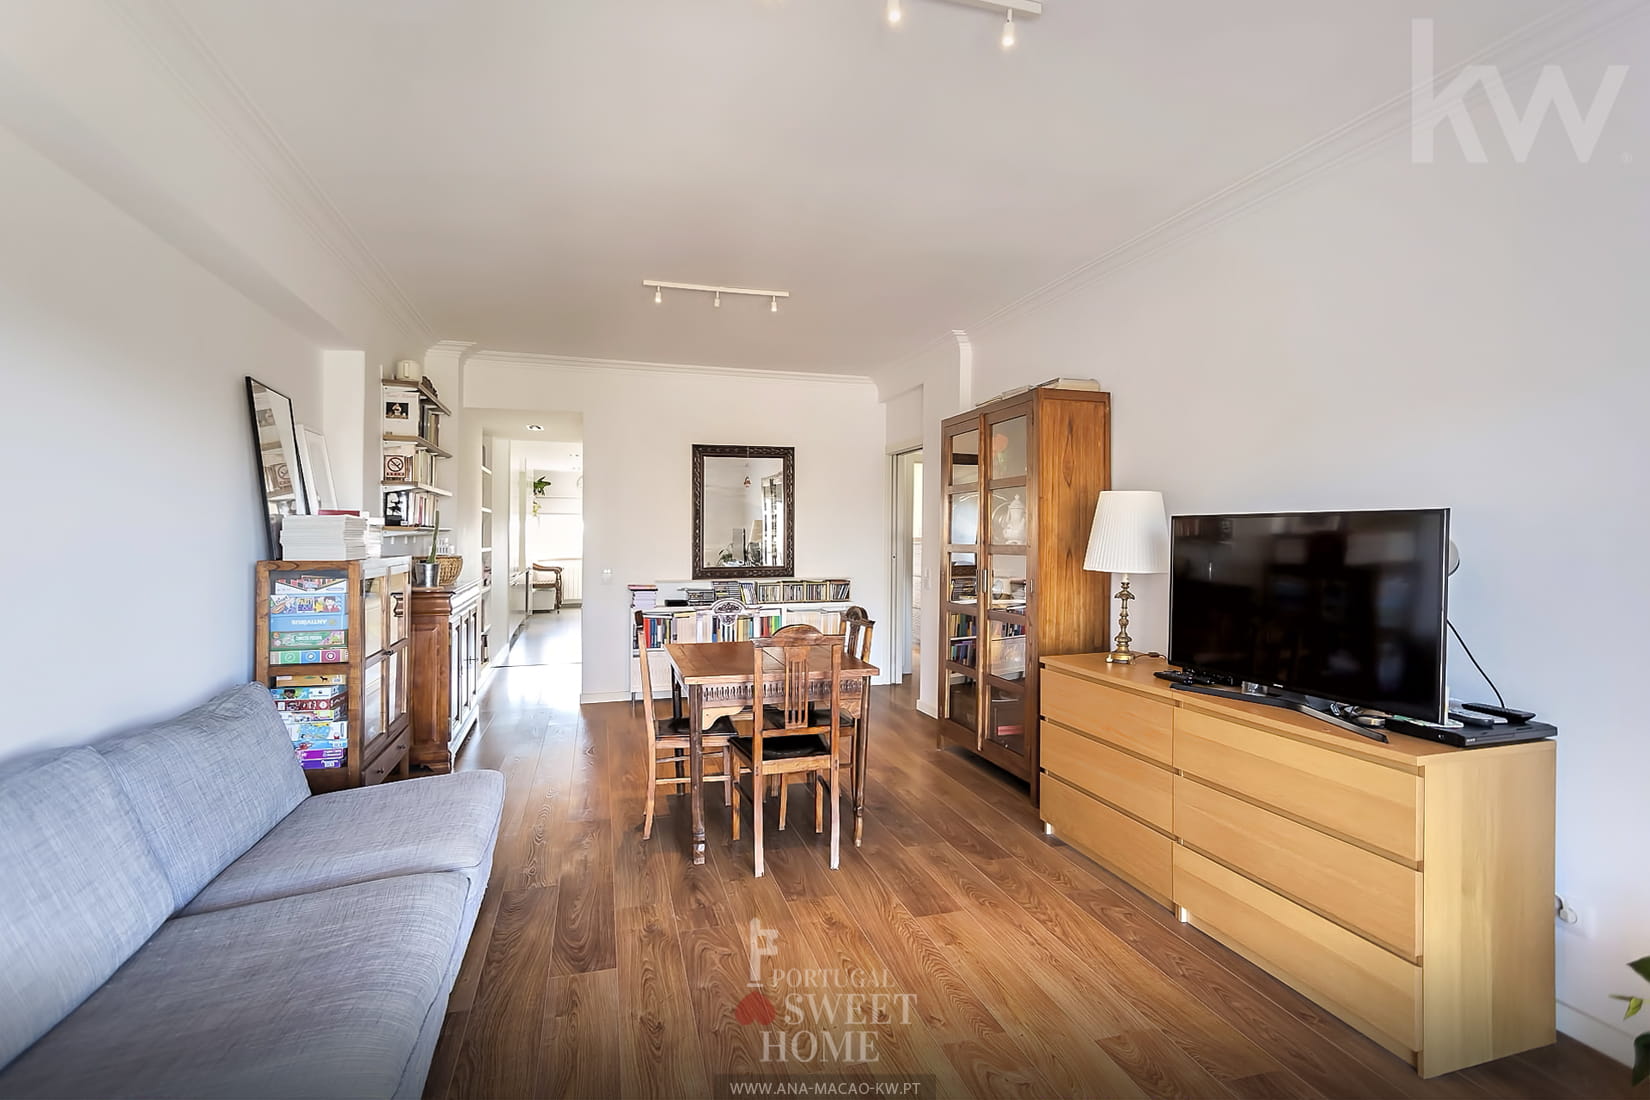 Spacious (23 m²) and bright room